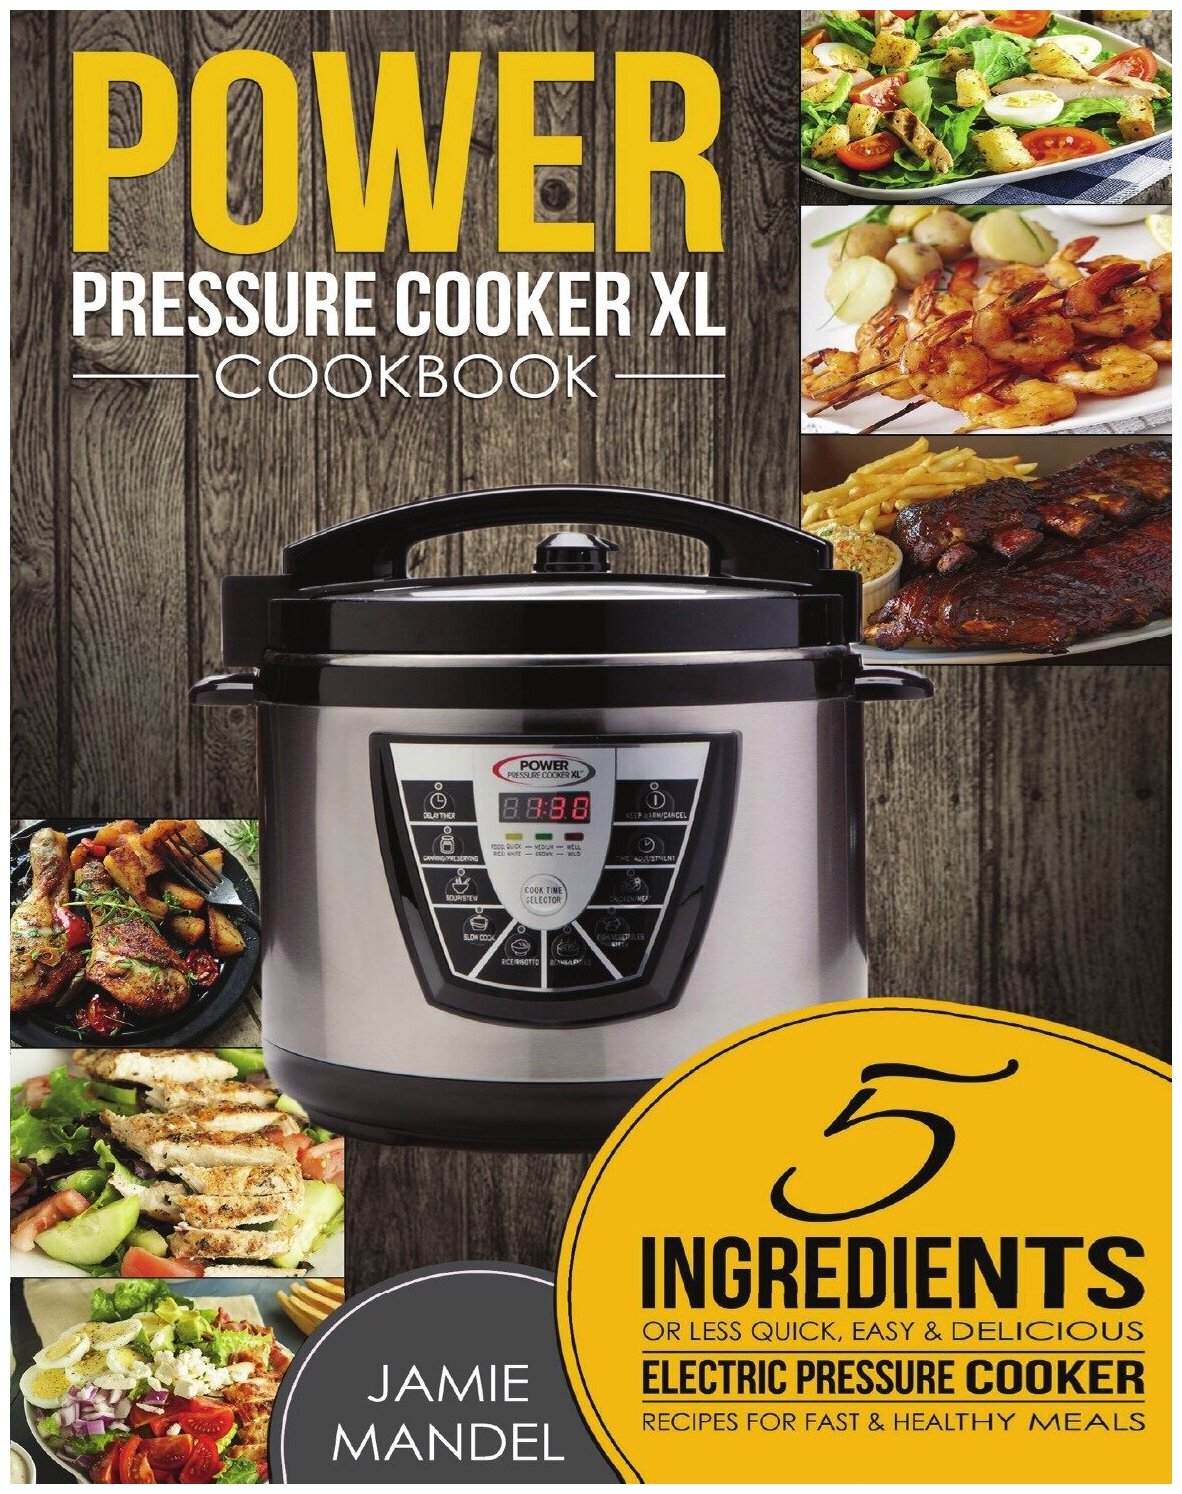 Power Pressure Cooker XL Cookbook. 5 Ingredients or Less Quick, Easy & Delicious Electric Pressure Cooker Recipes for Fast & Healthy Meals